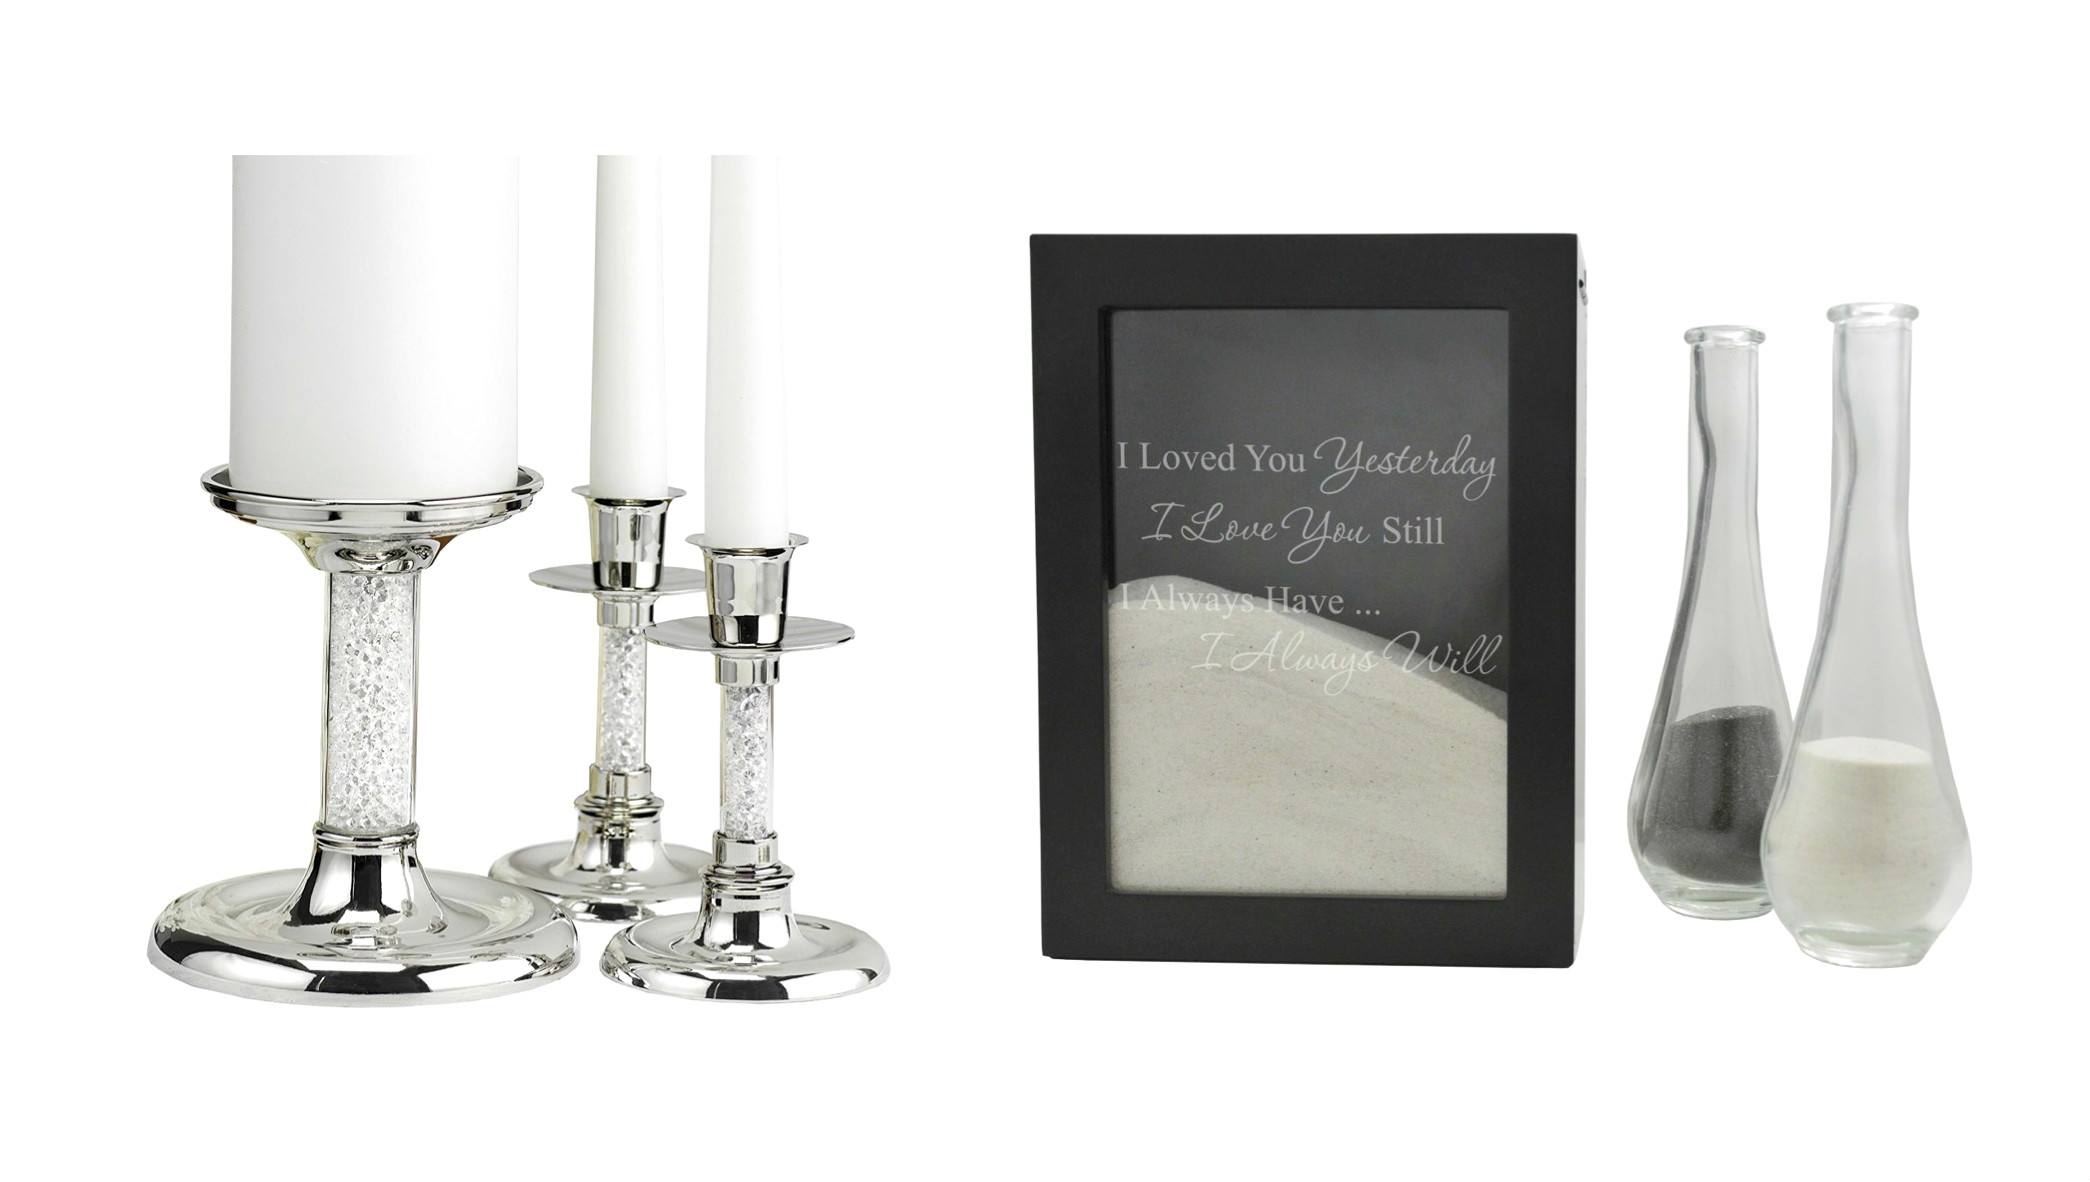 Plain Wedding Unity Candle White or Ivory with Glass holders as optional extra 